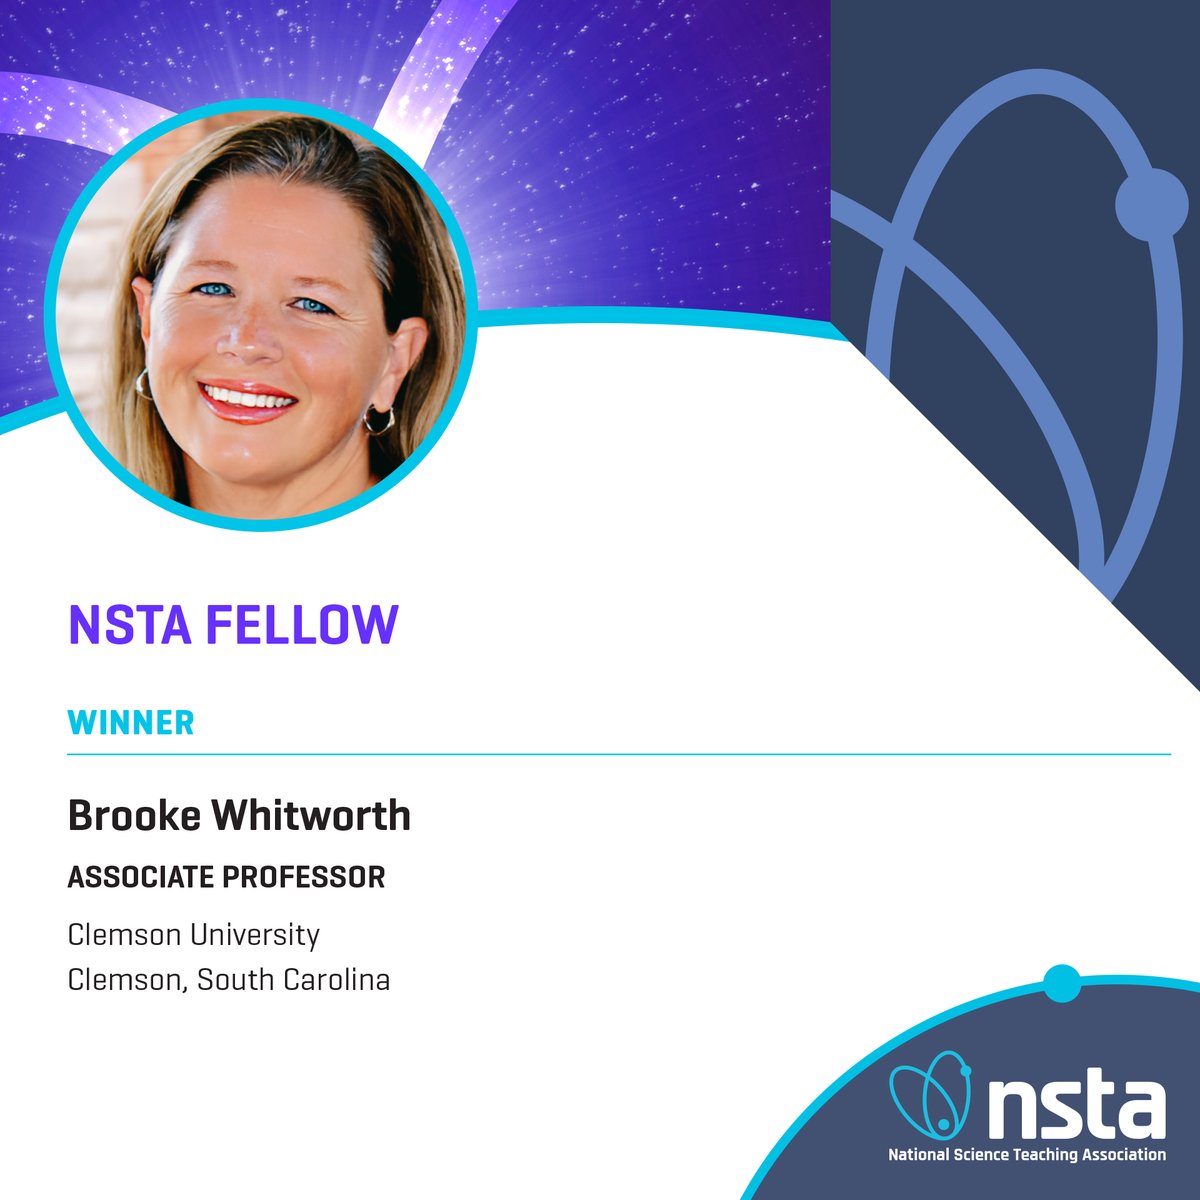 🎈🎉 Massive congrats to Brooke Whitworth who was honored this past March at #NSTA23 Atlanta, for winning the #NSTA Fellow Award!
#STEM #SciEd #Education #Teacher